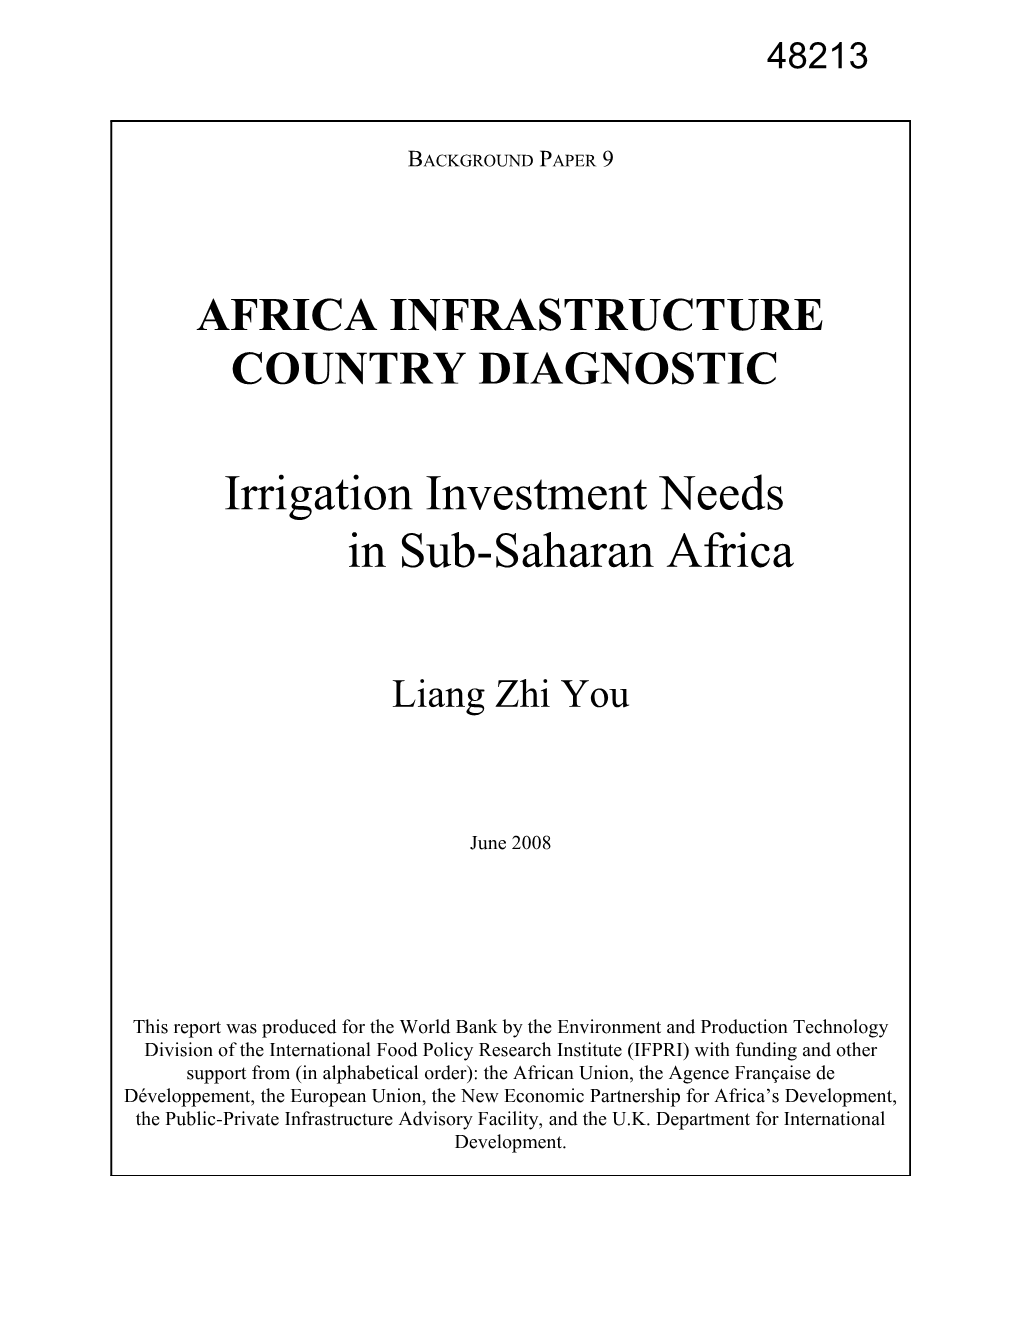 Feasibility and Potential Payoff of Irrigation in Africa